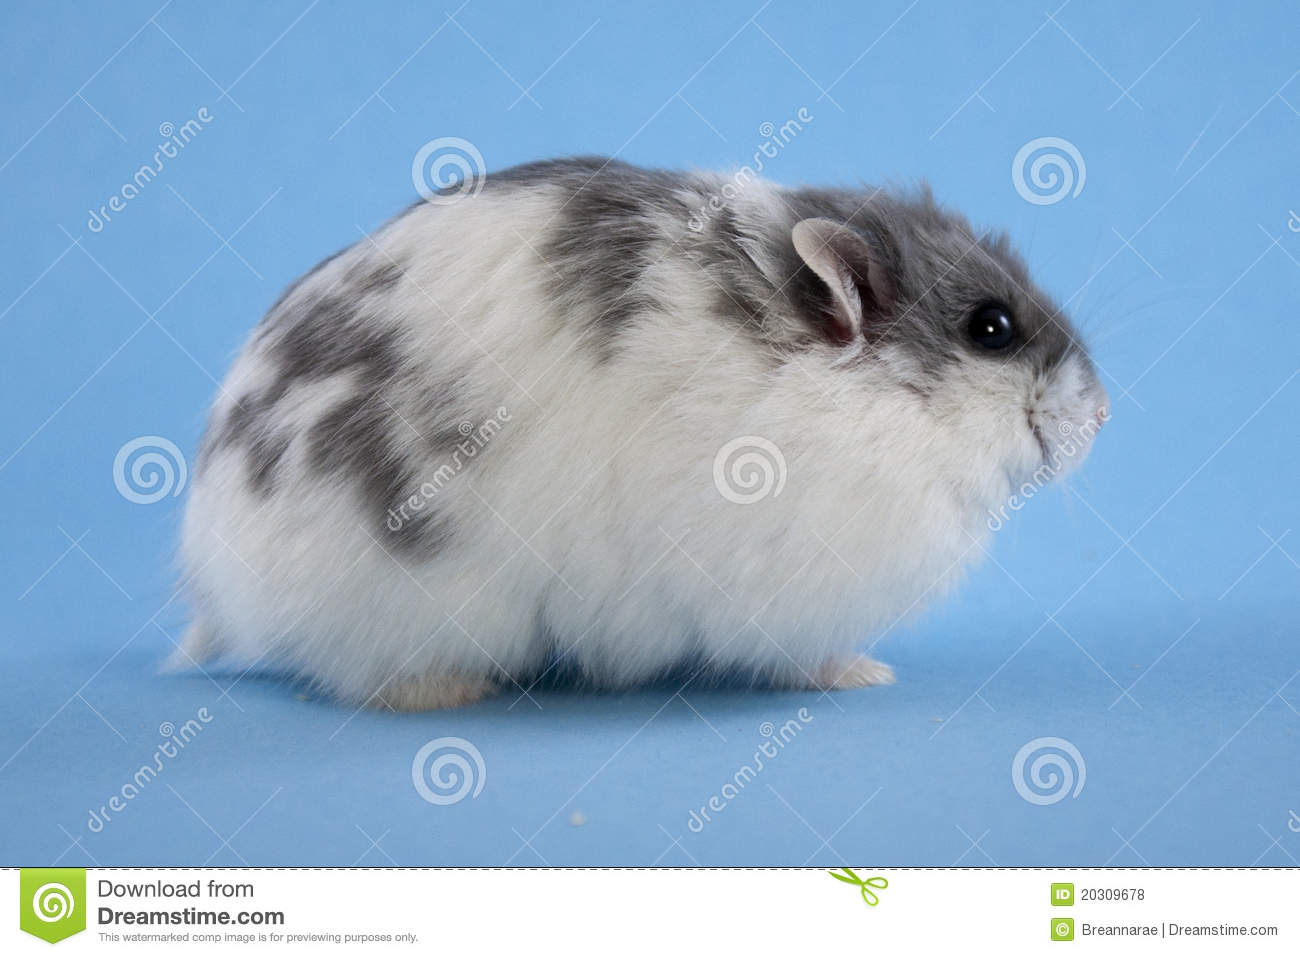 Spotted Blue Dwarf Hamster On A Blue Seamless Background 